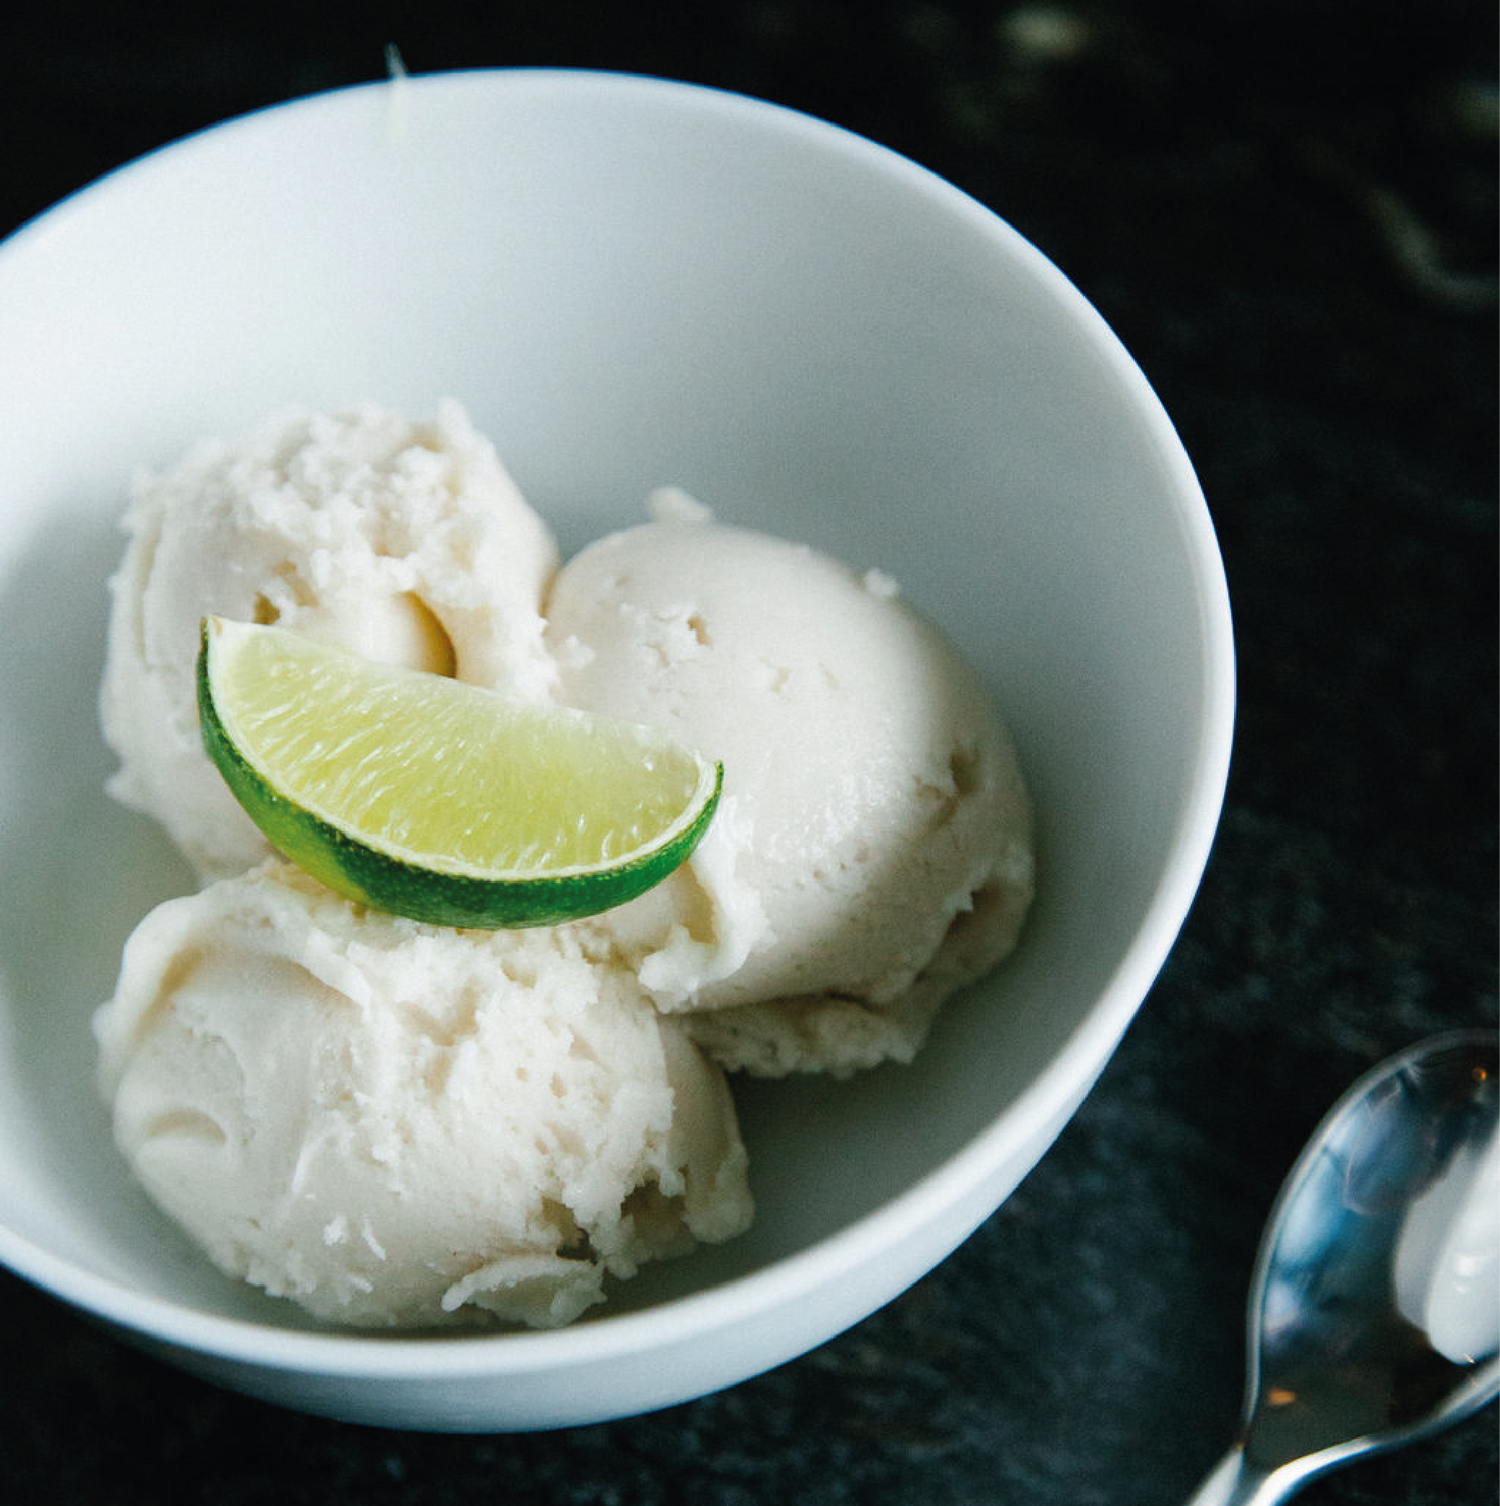 Banana and Lime Ice Cream with lime garnish in bowl